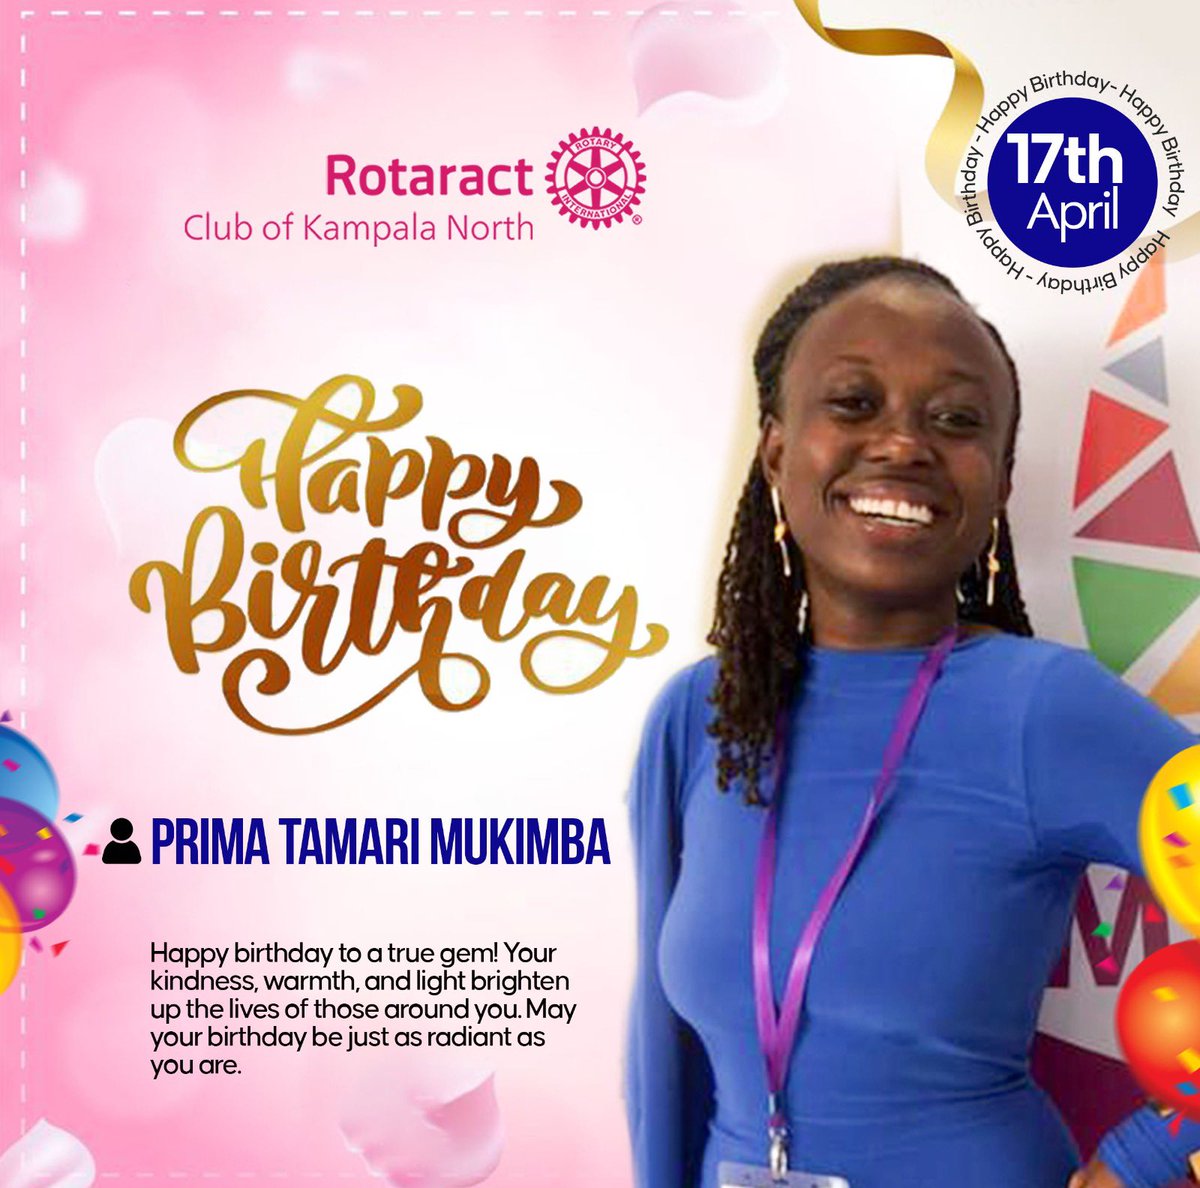 Birthday 🥳 blessings @kanosug projects chair! Let’s meet today at @Redbaskethebay 😂